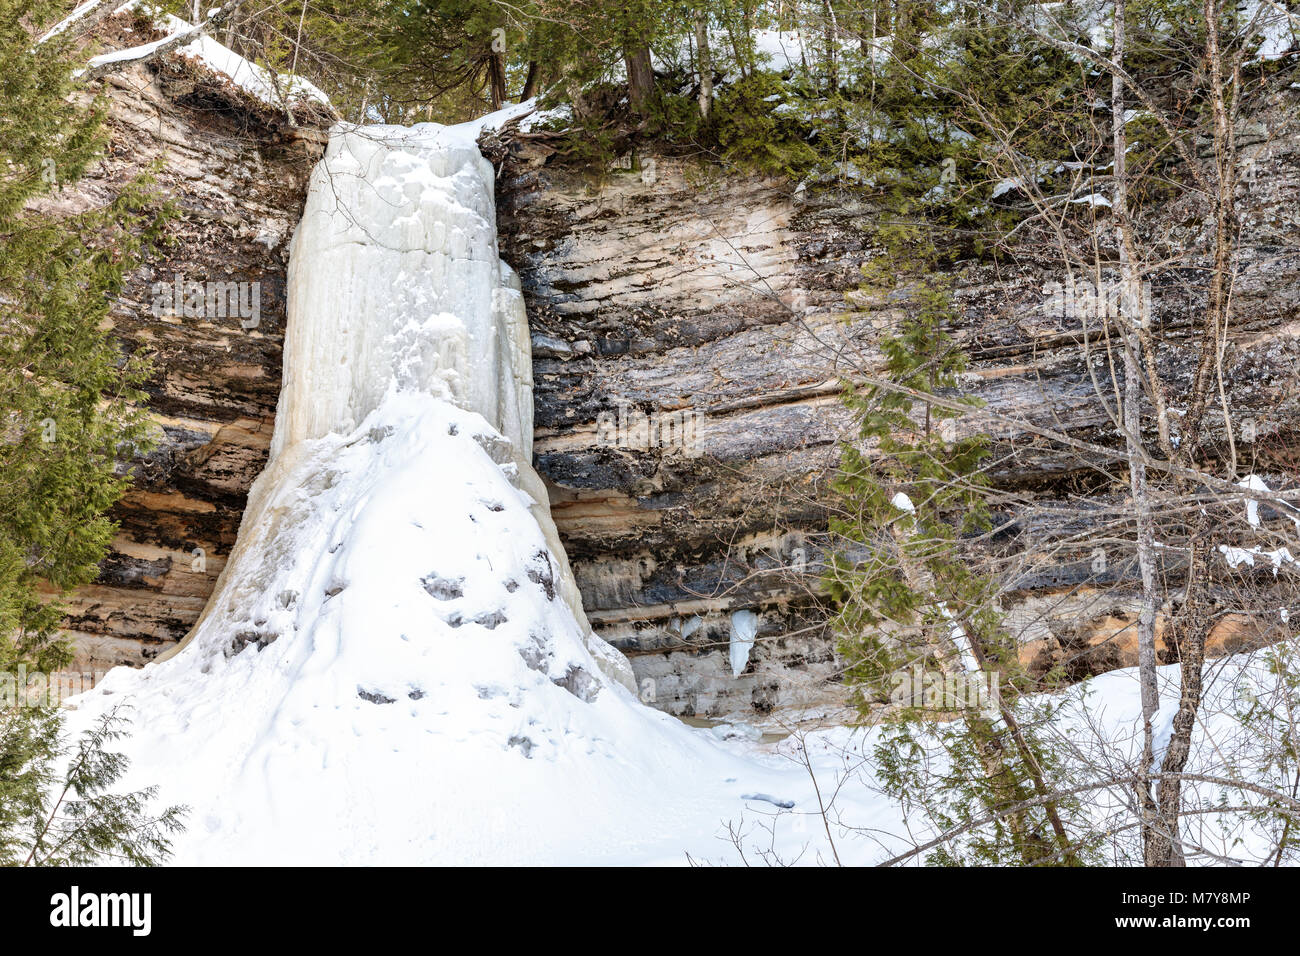 Munising Falls, a waterfall in Munising Michigan freezes solid in winter time, surrounded by basalt and sandstone rock. Stock Photo